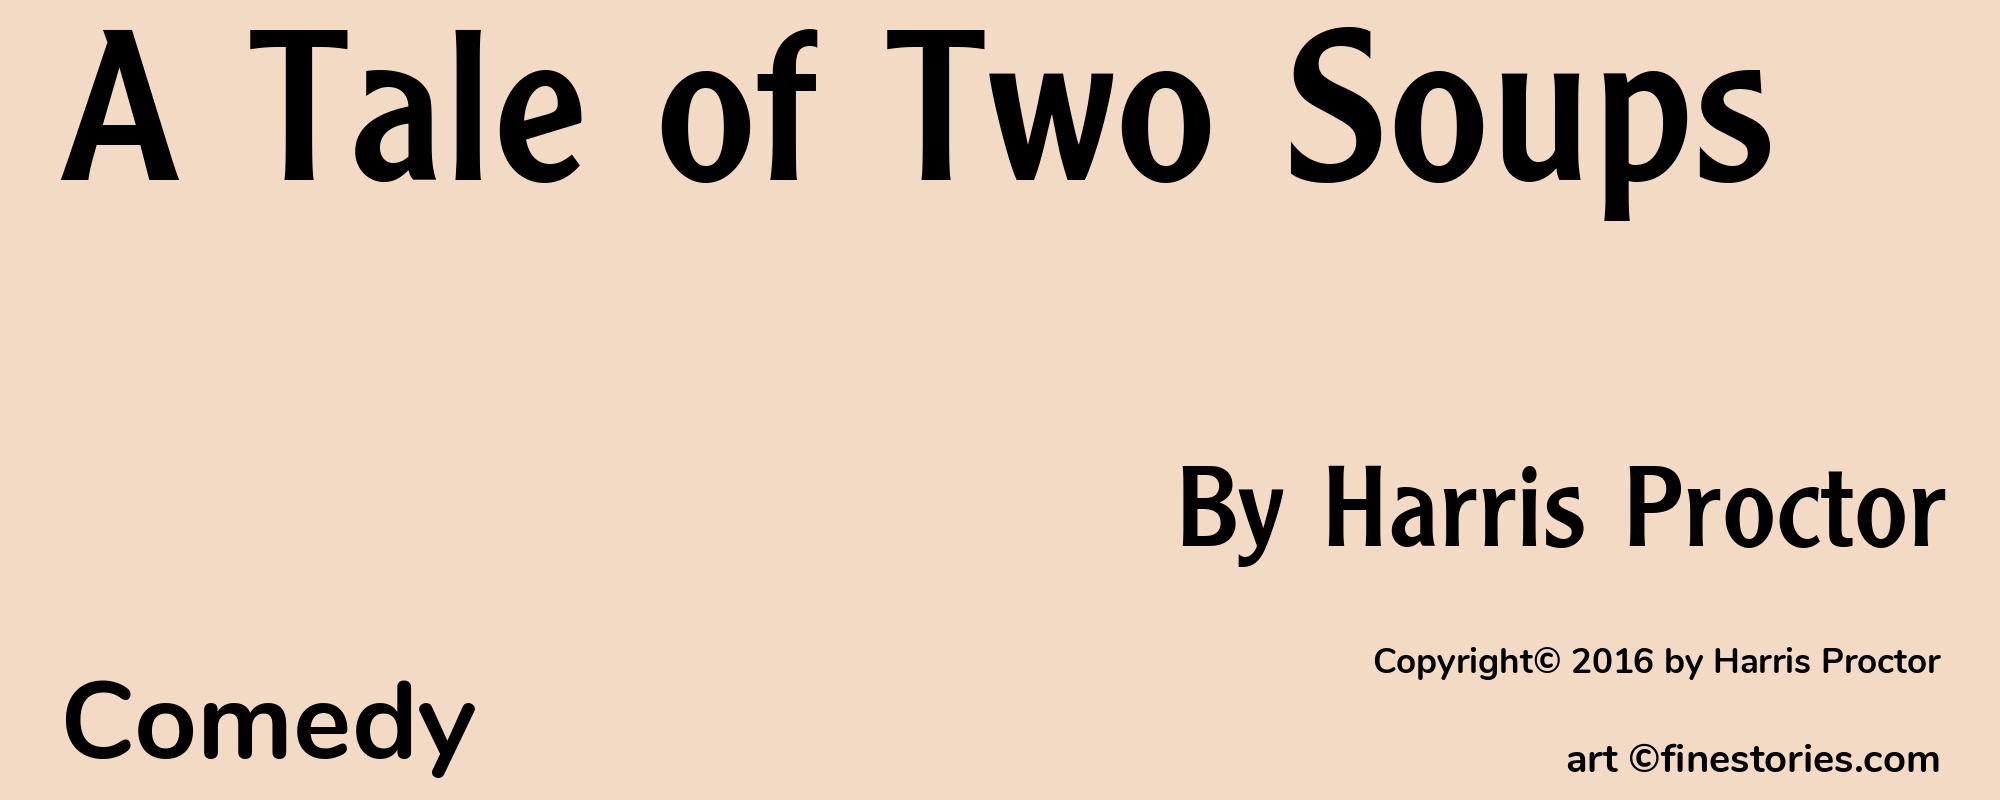 A Tale of Two Soups - Cover